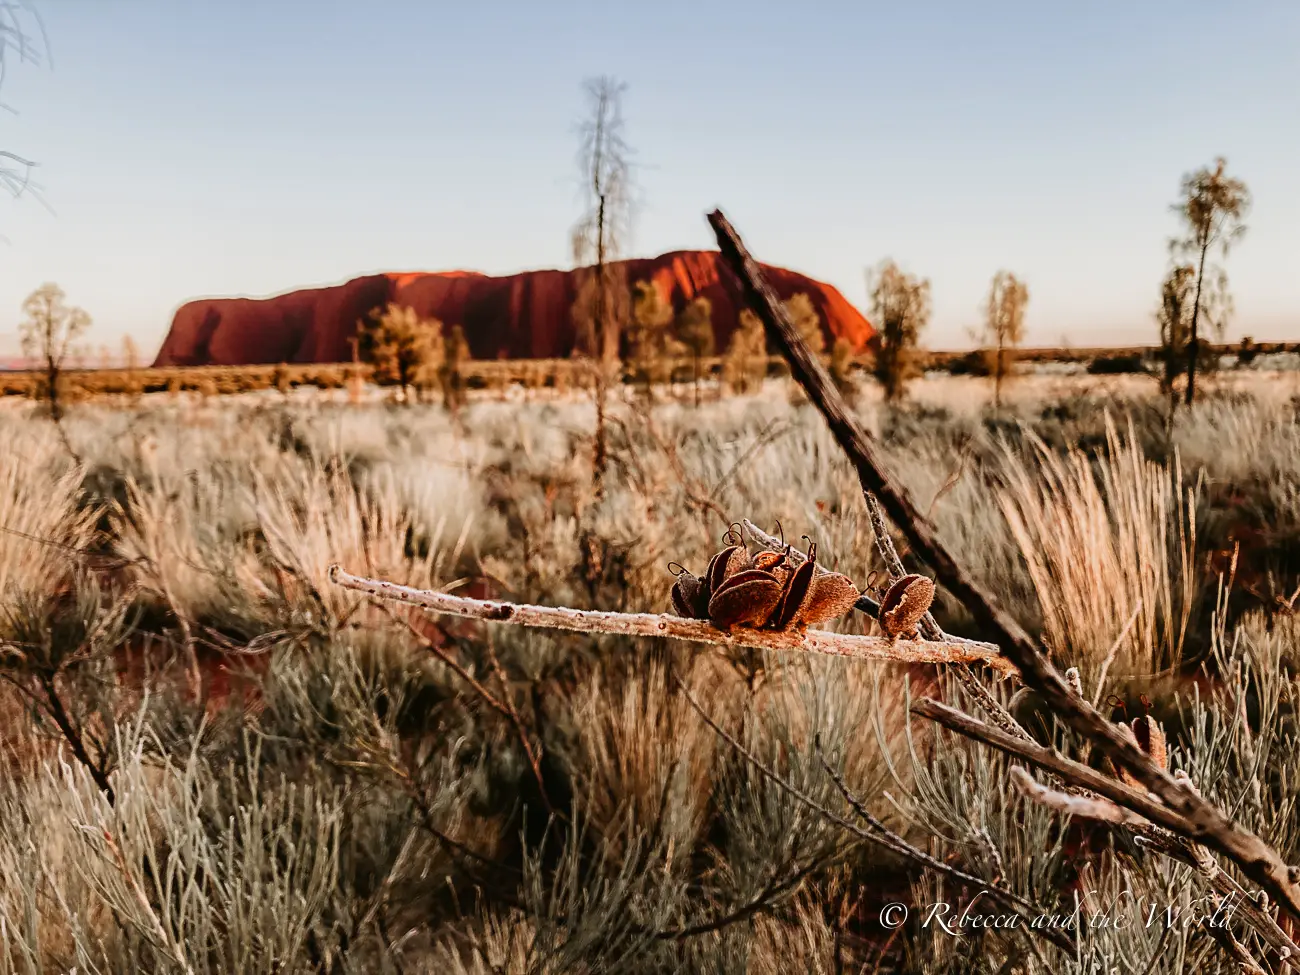 A view of Uluru at sunrise with the rock formation glowing red, a close-up of a plant in the foreground, and the desert landscape covered with spinifex grass.